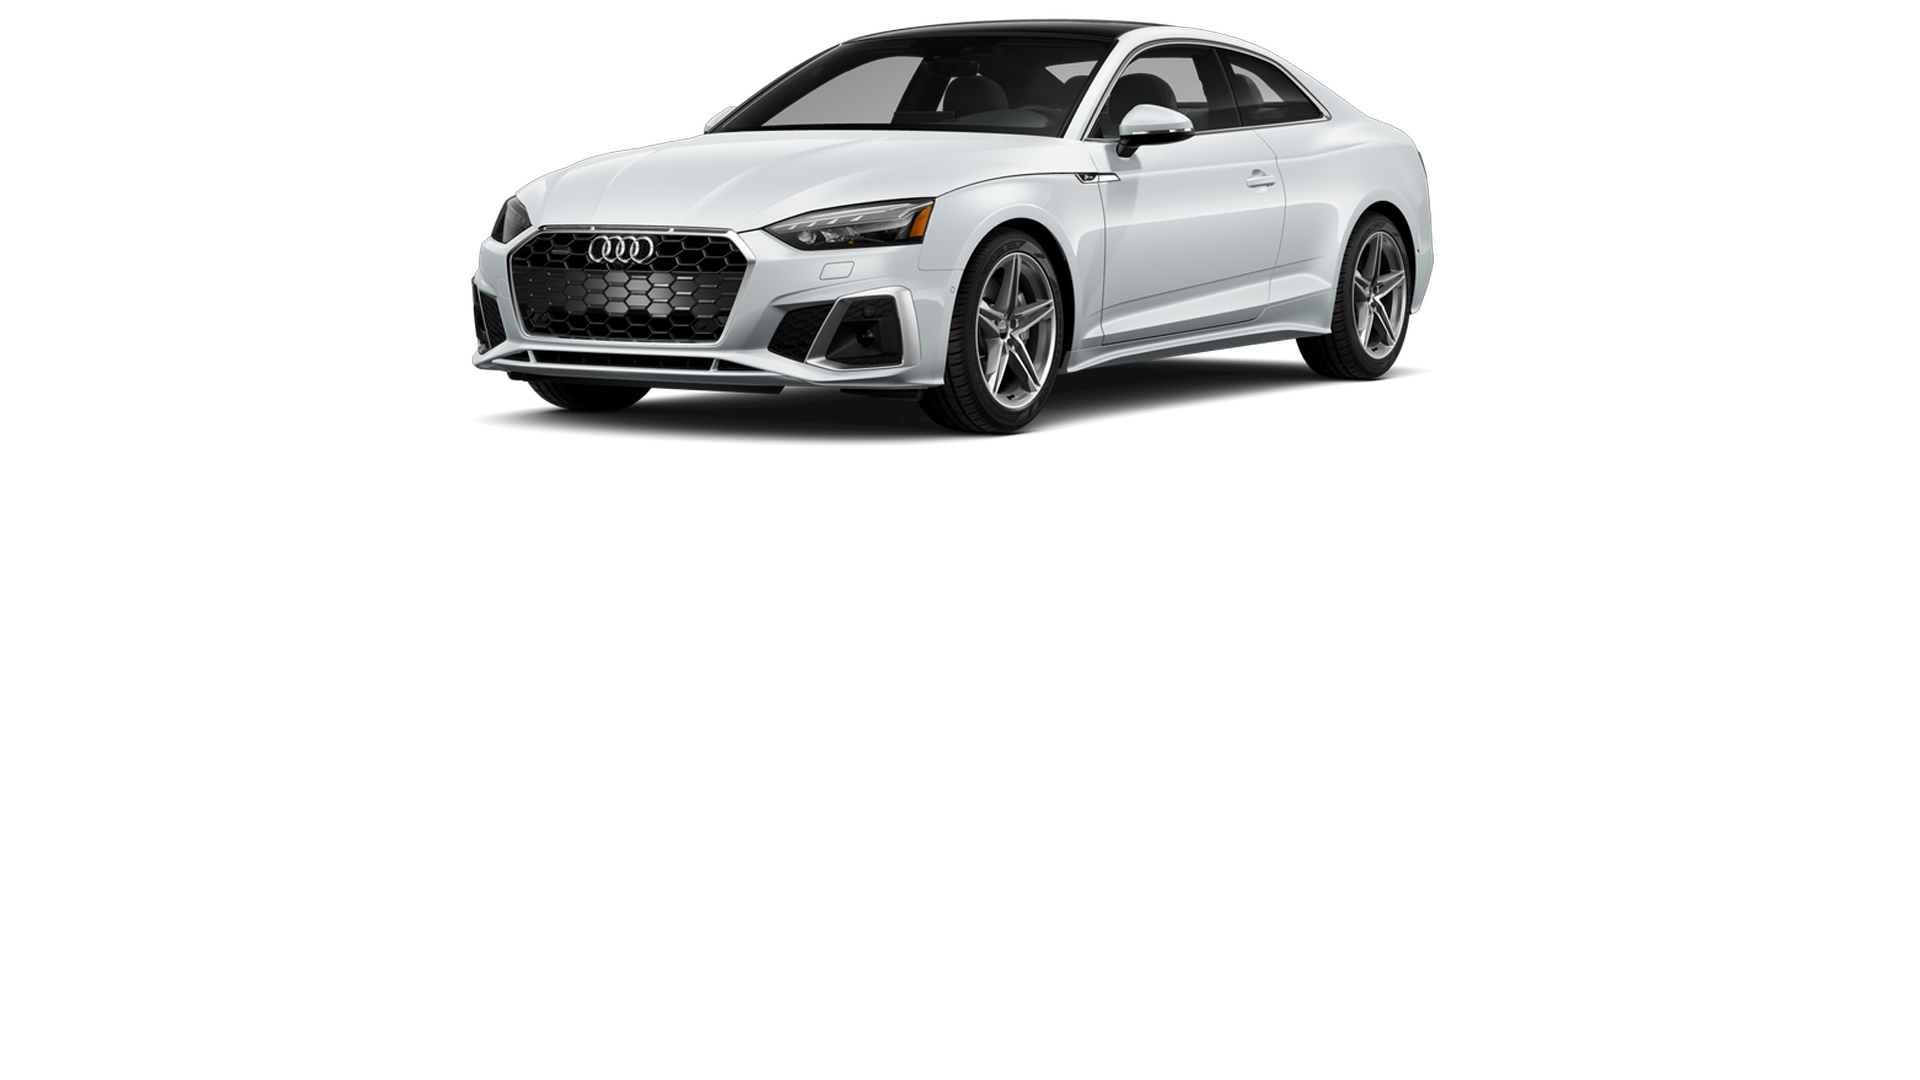 https://www.audiusa.com/content/dam/nemo/us/shopping-tools/accessories/a5/jellybeans/1920x1080_A5-coupe_2022.jpg